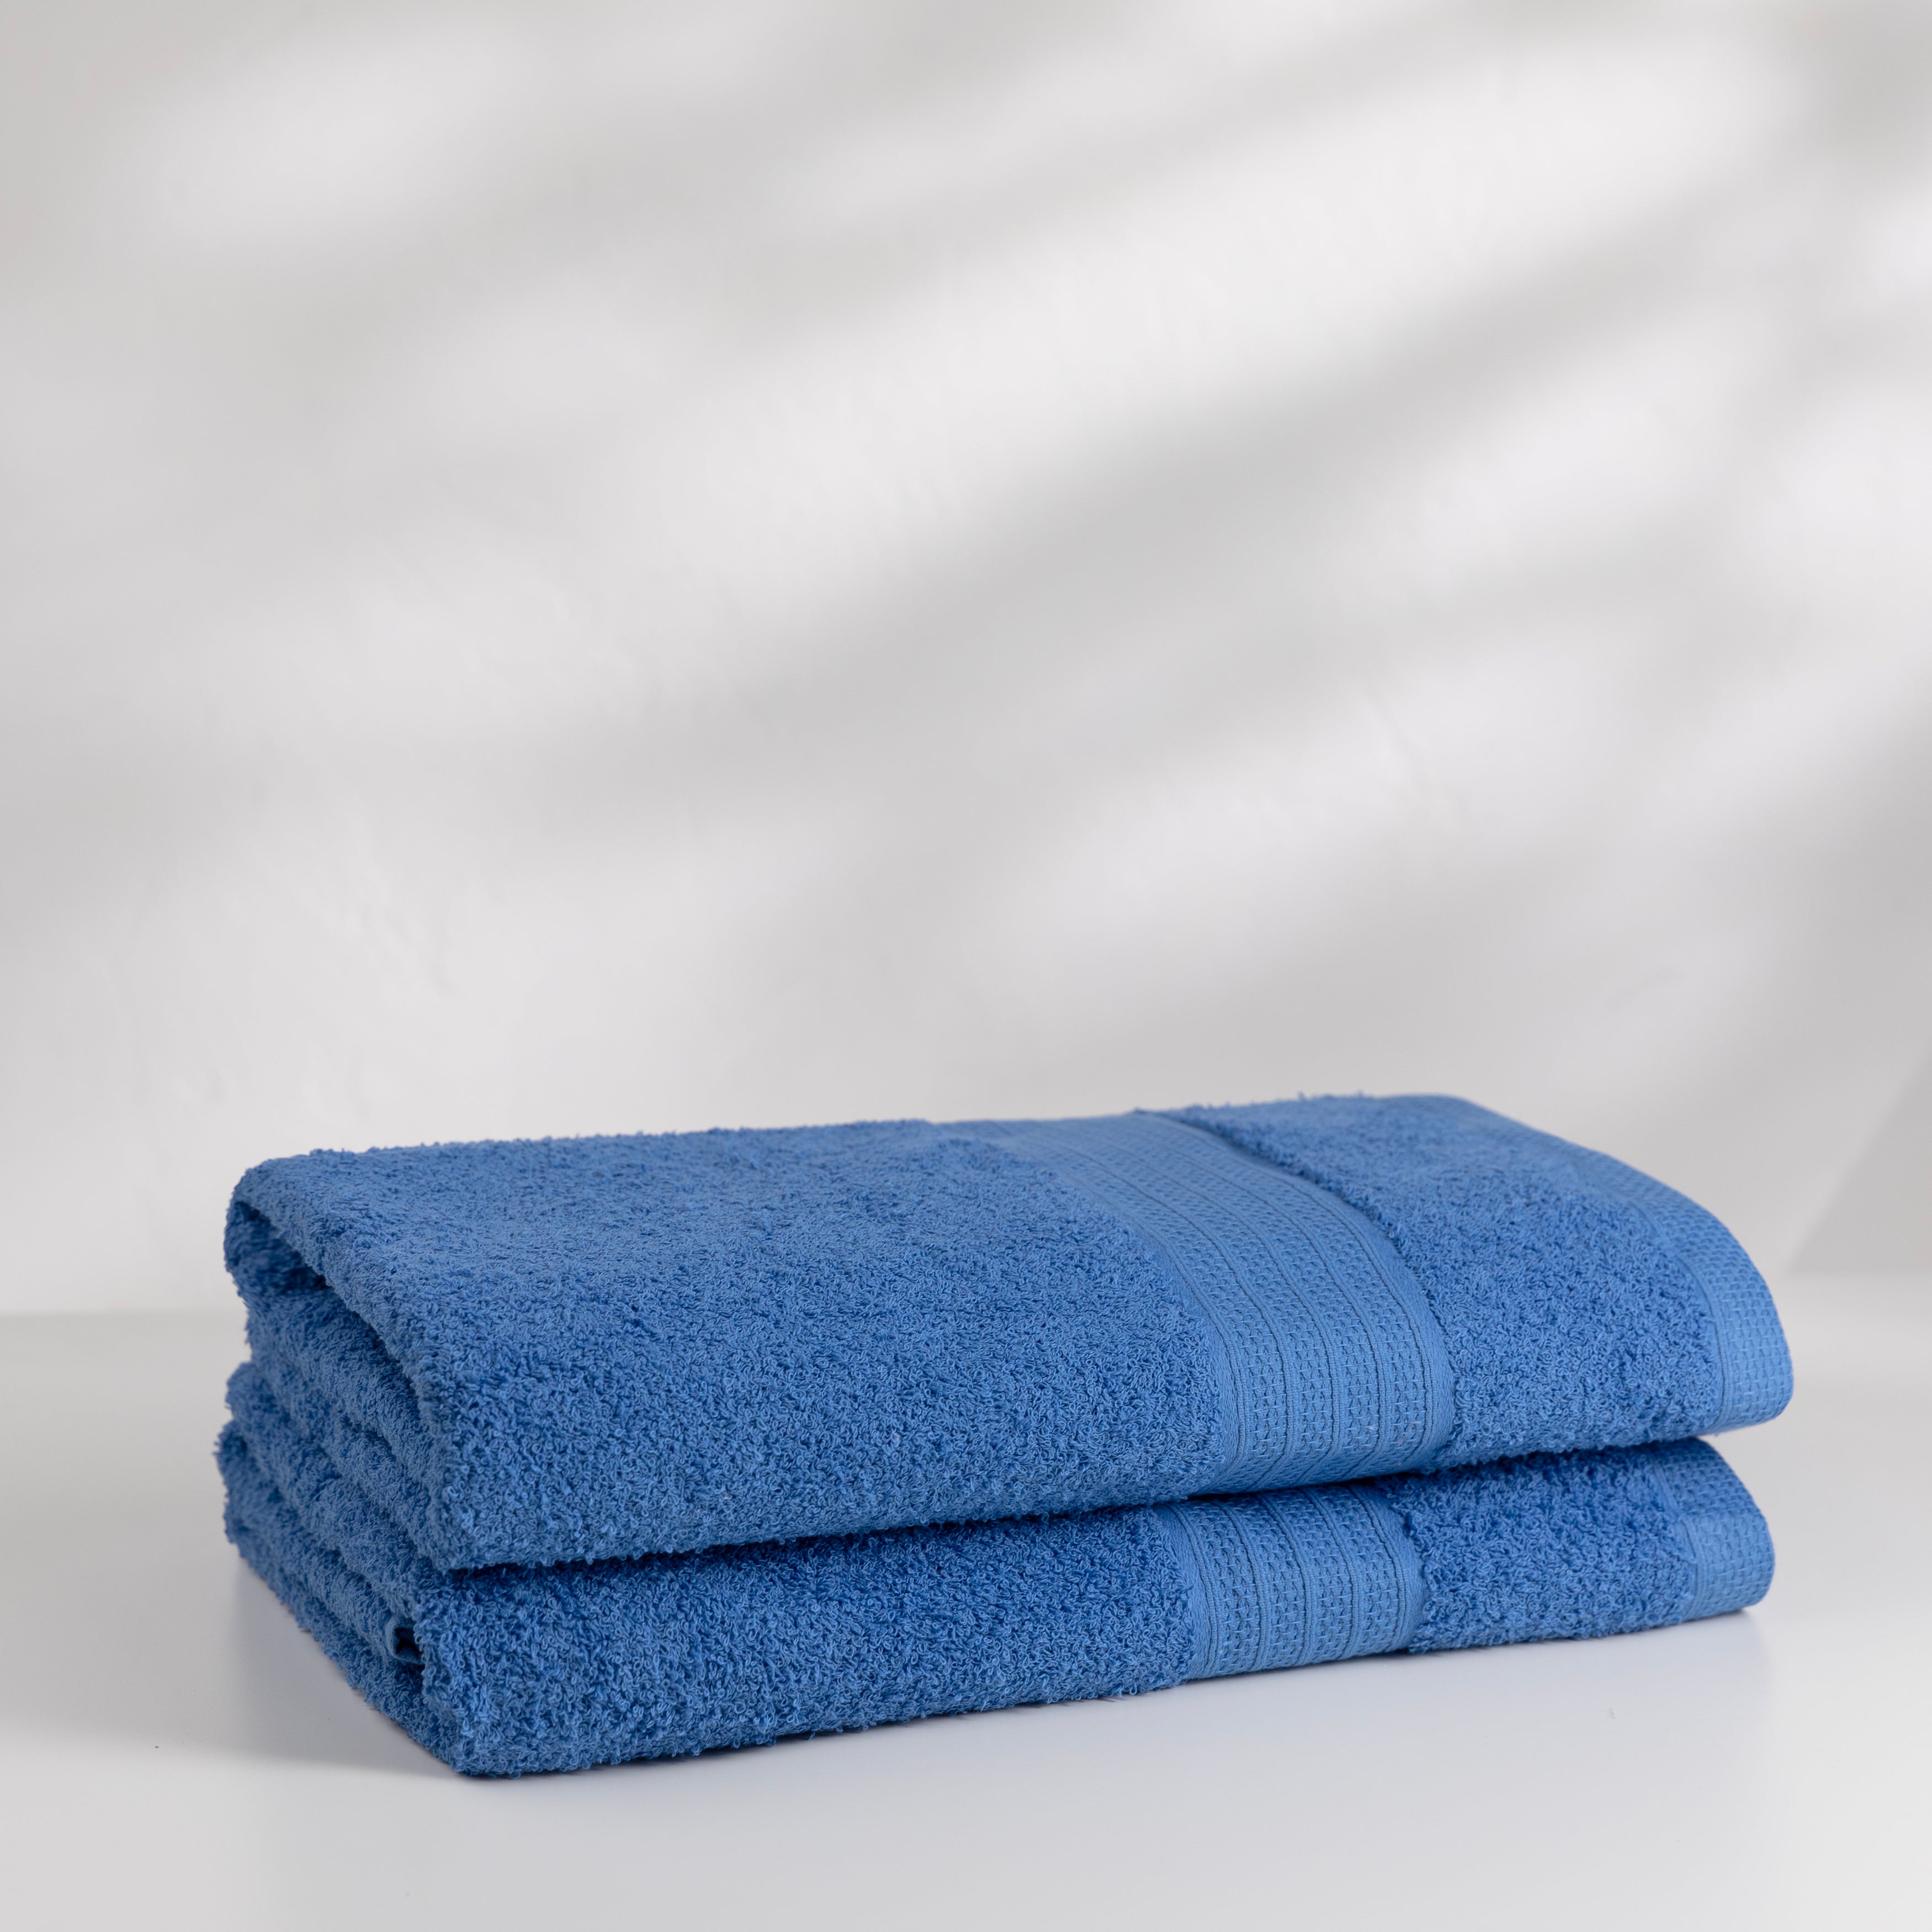 Splash! Is your Towel Pool-Ready? - Learn More About Sobel Westex Pillows  And Linens